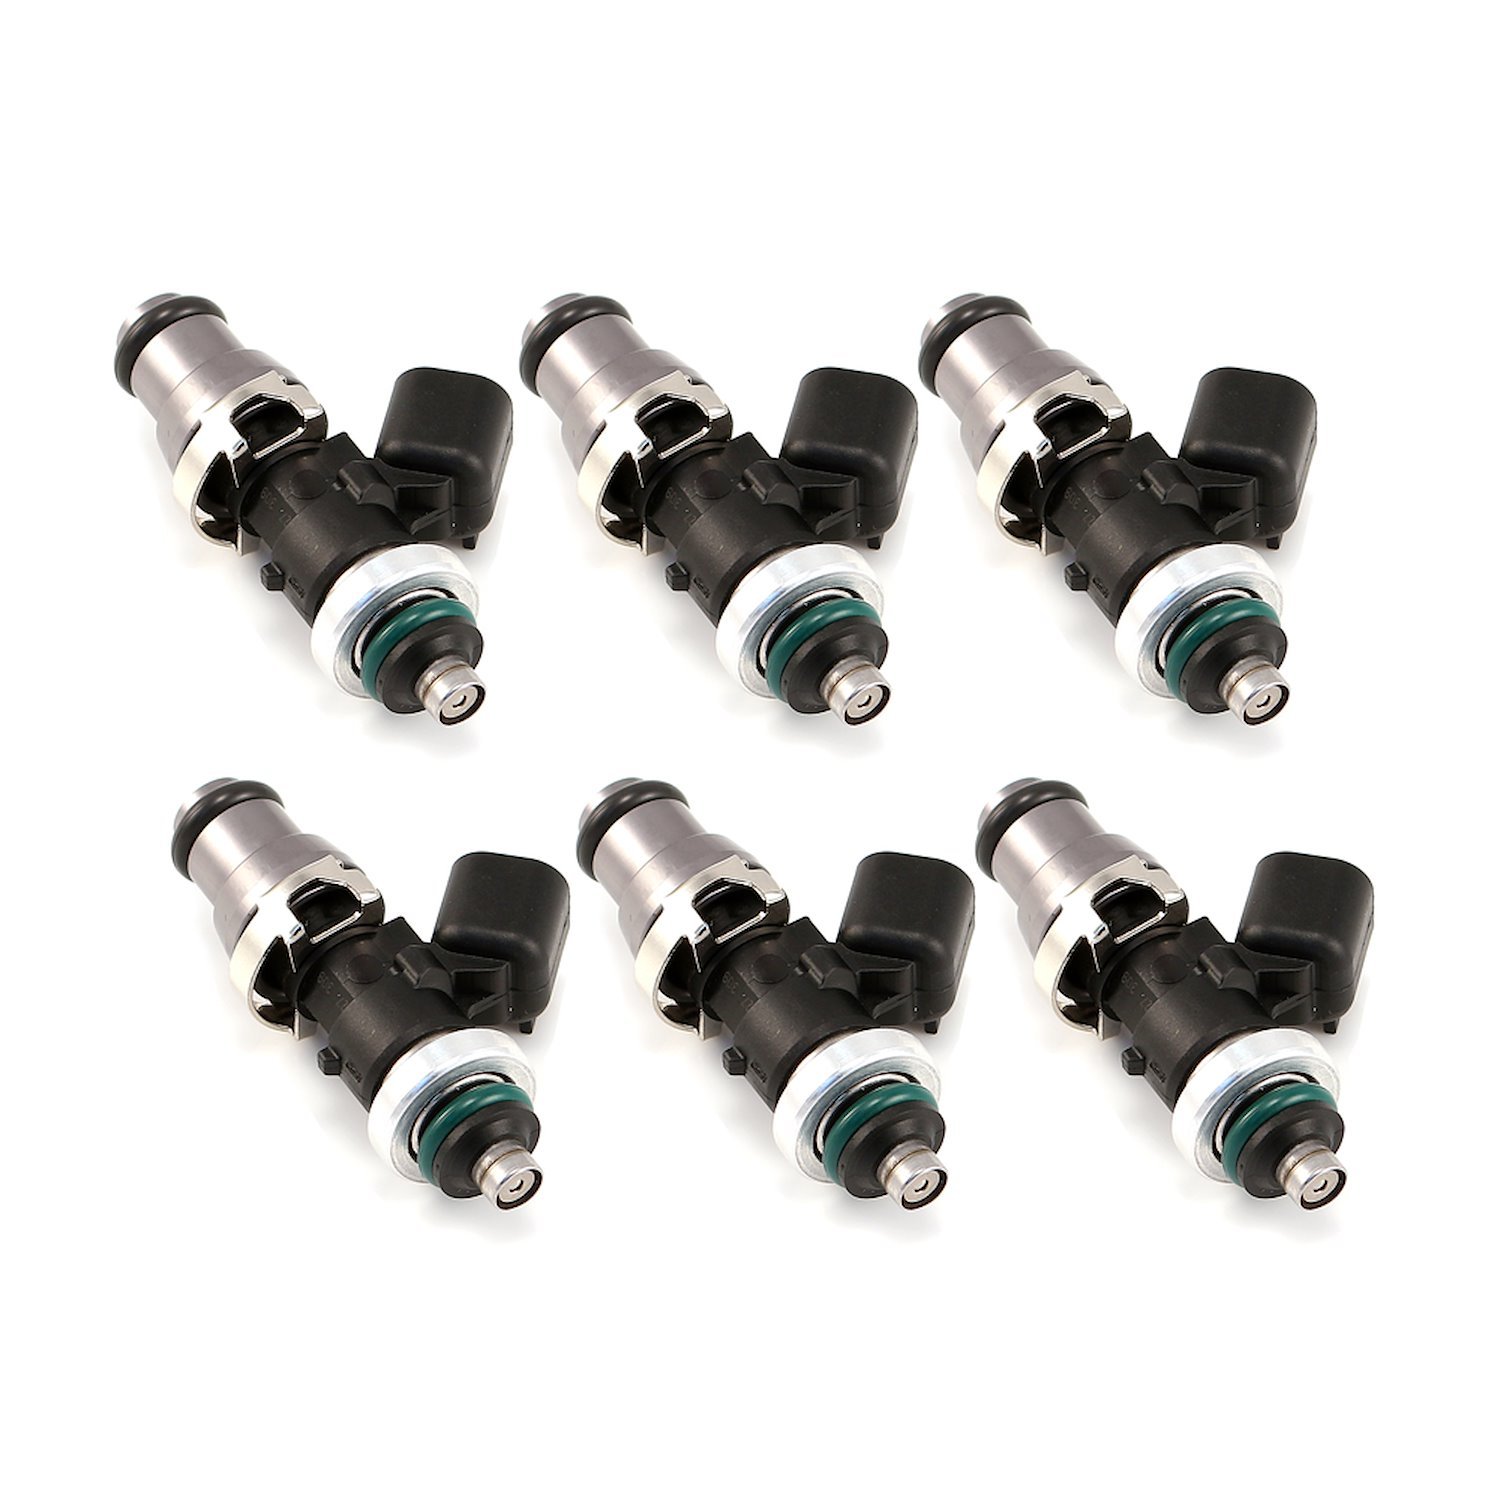 1300.48.14.R35.6 1340cc Fuel Injector Set, 48 mm Length, 14 mm Grey Top, 14 mm Lower O-Ring (R35 Low Spacer)